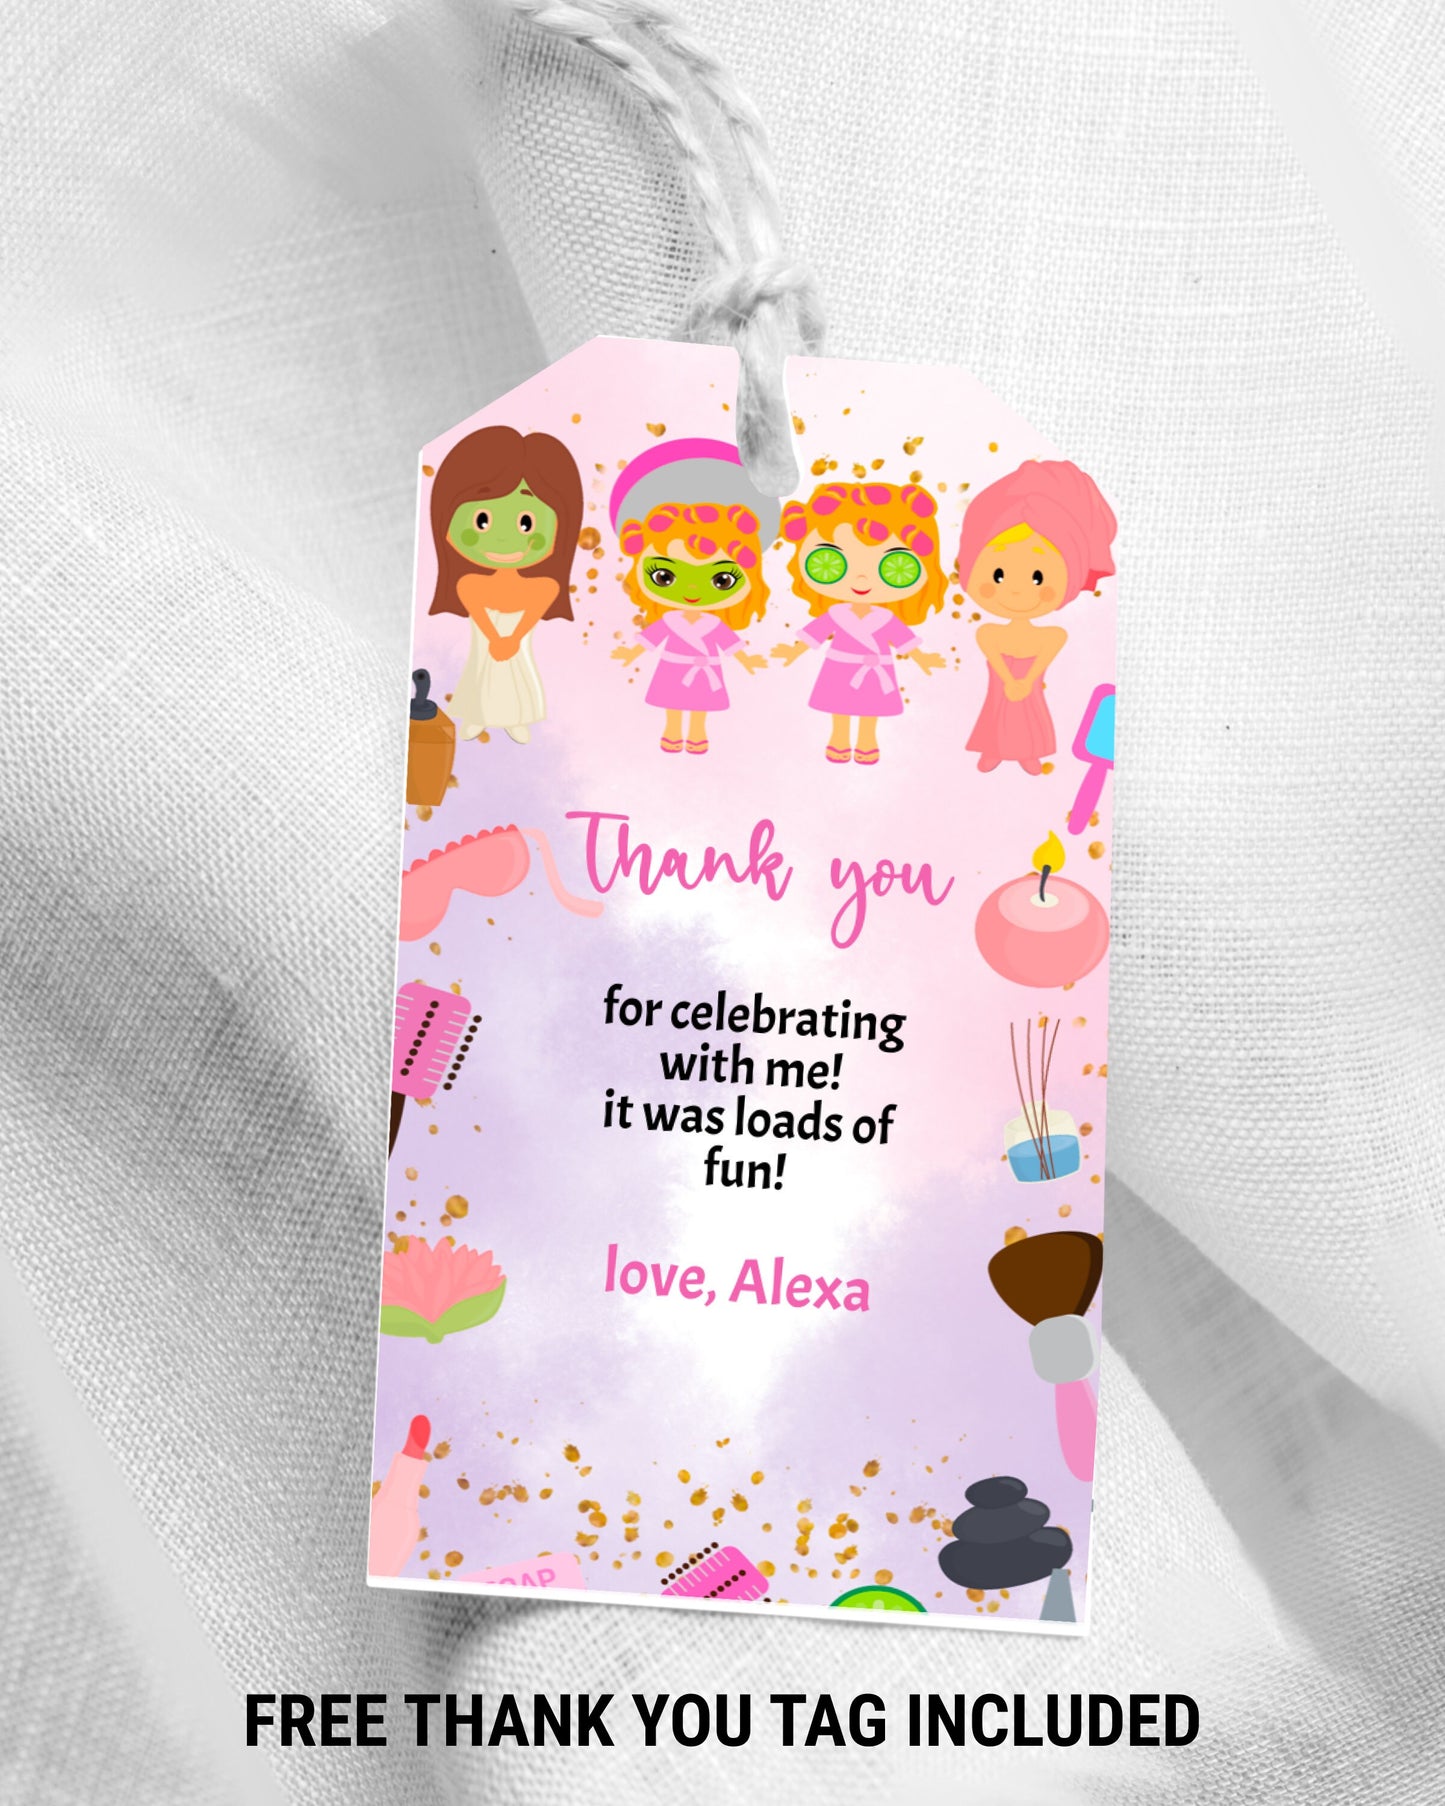 Spa Party Electronic Invitation Template, Spa Party Birthday Phone Invitation, Spa Party Thank you tag, Editable Electronic Invitation, SPA